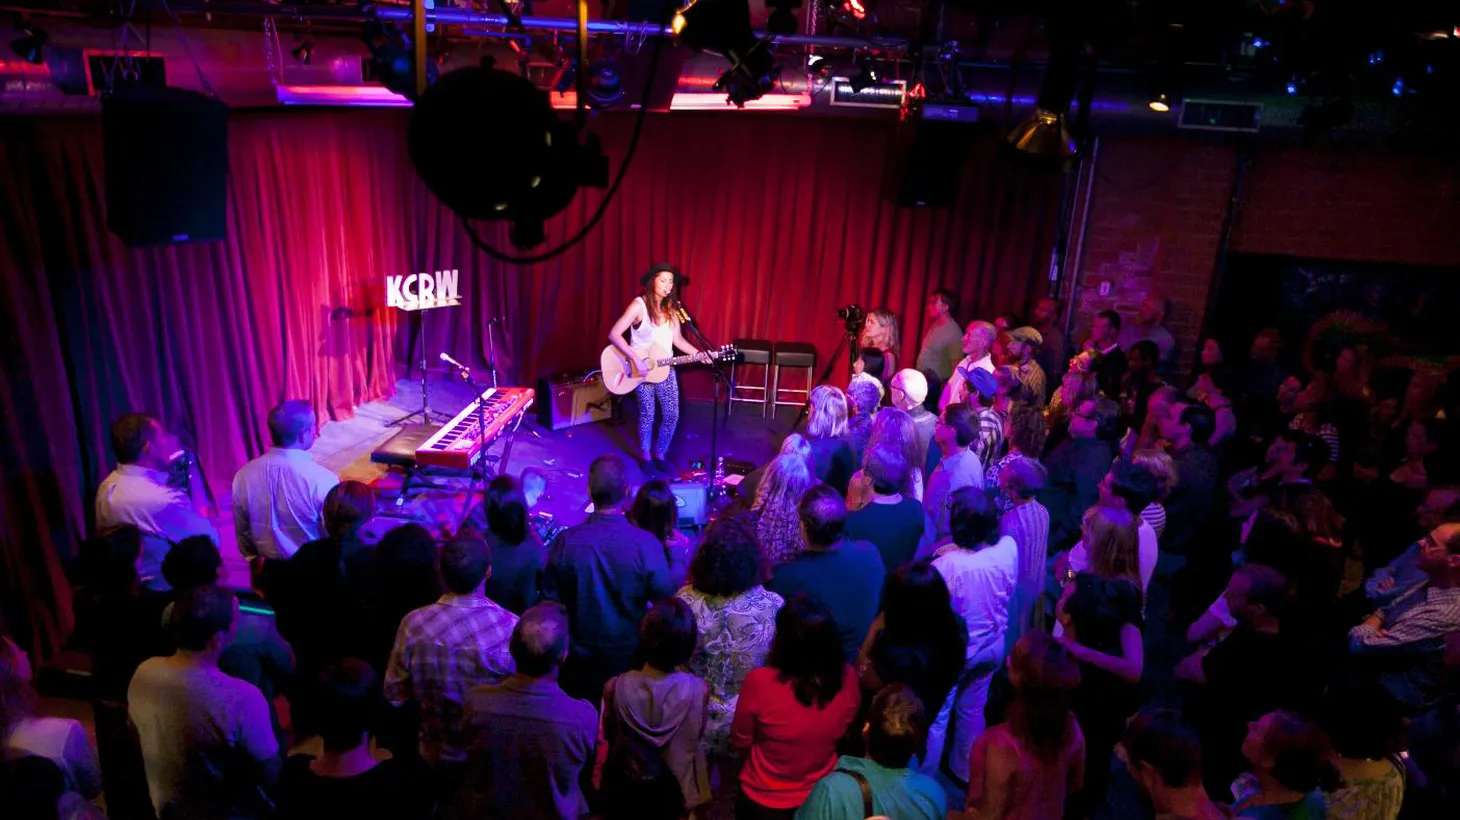 Guitarist and songwriter extraordinaire KT Tunstall delighted a small audience, performing a solo acoustic set of songs from her new album at KCRW's Apogee Sessions.